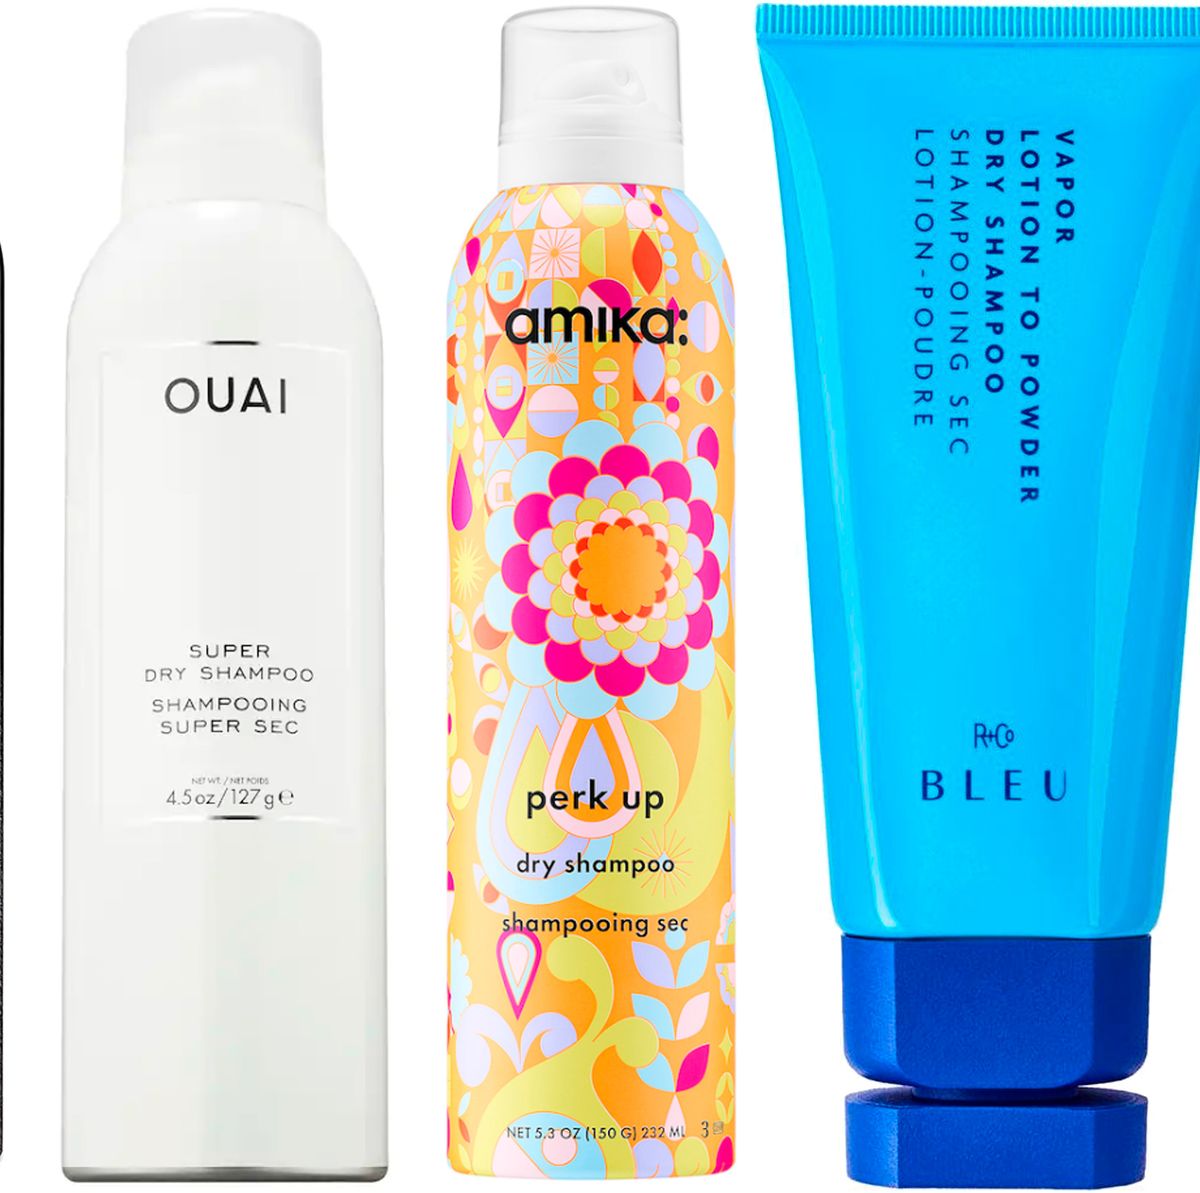 stout Overtreffen gloeilamp The 15 Best Dry Shampoos of 2023 - Dry Shampoo for Oily, Fine Hair